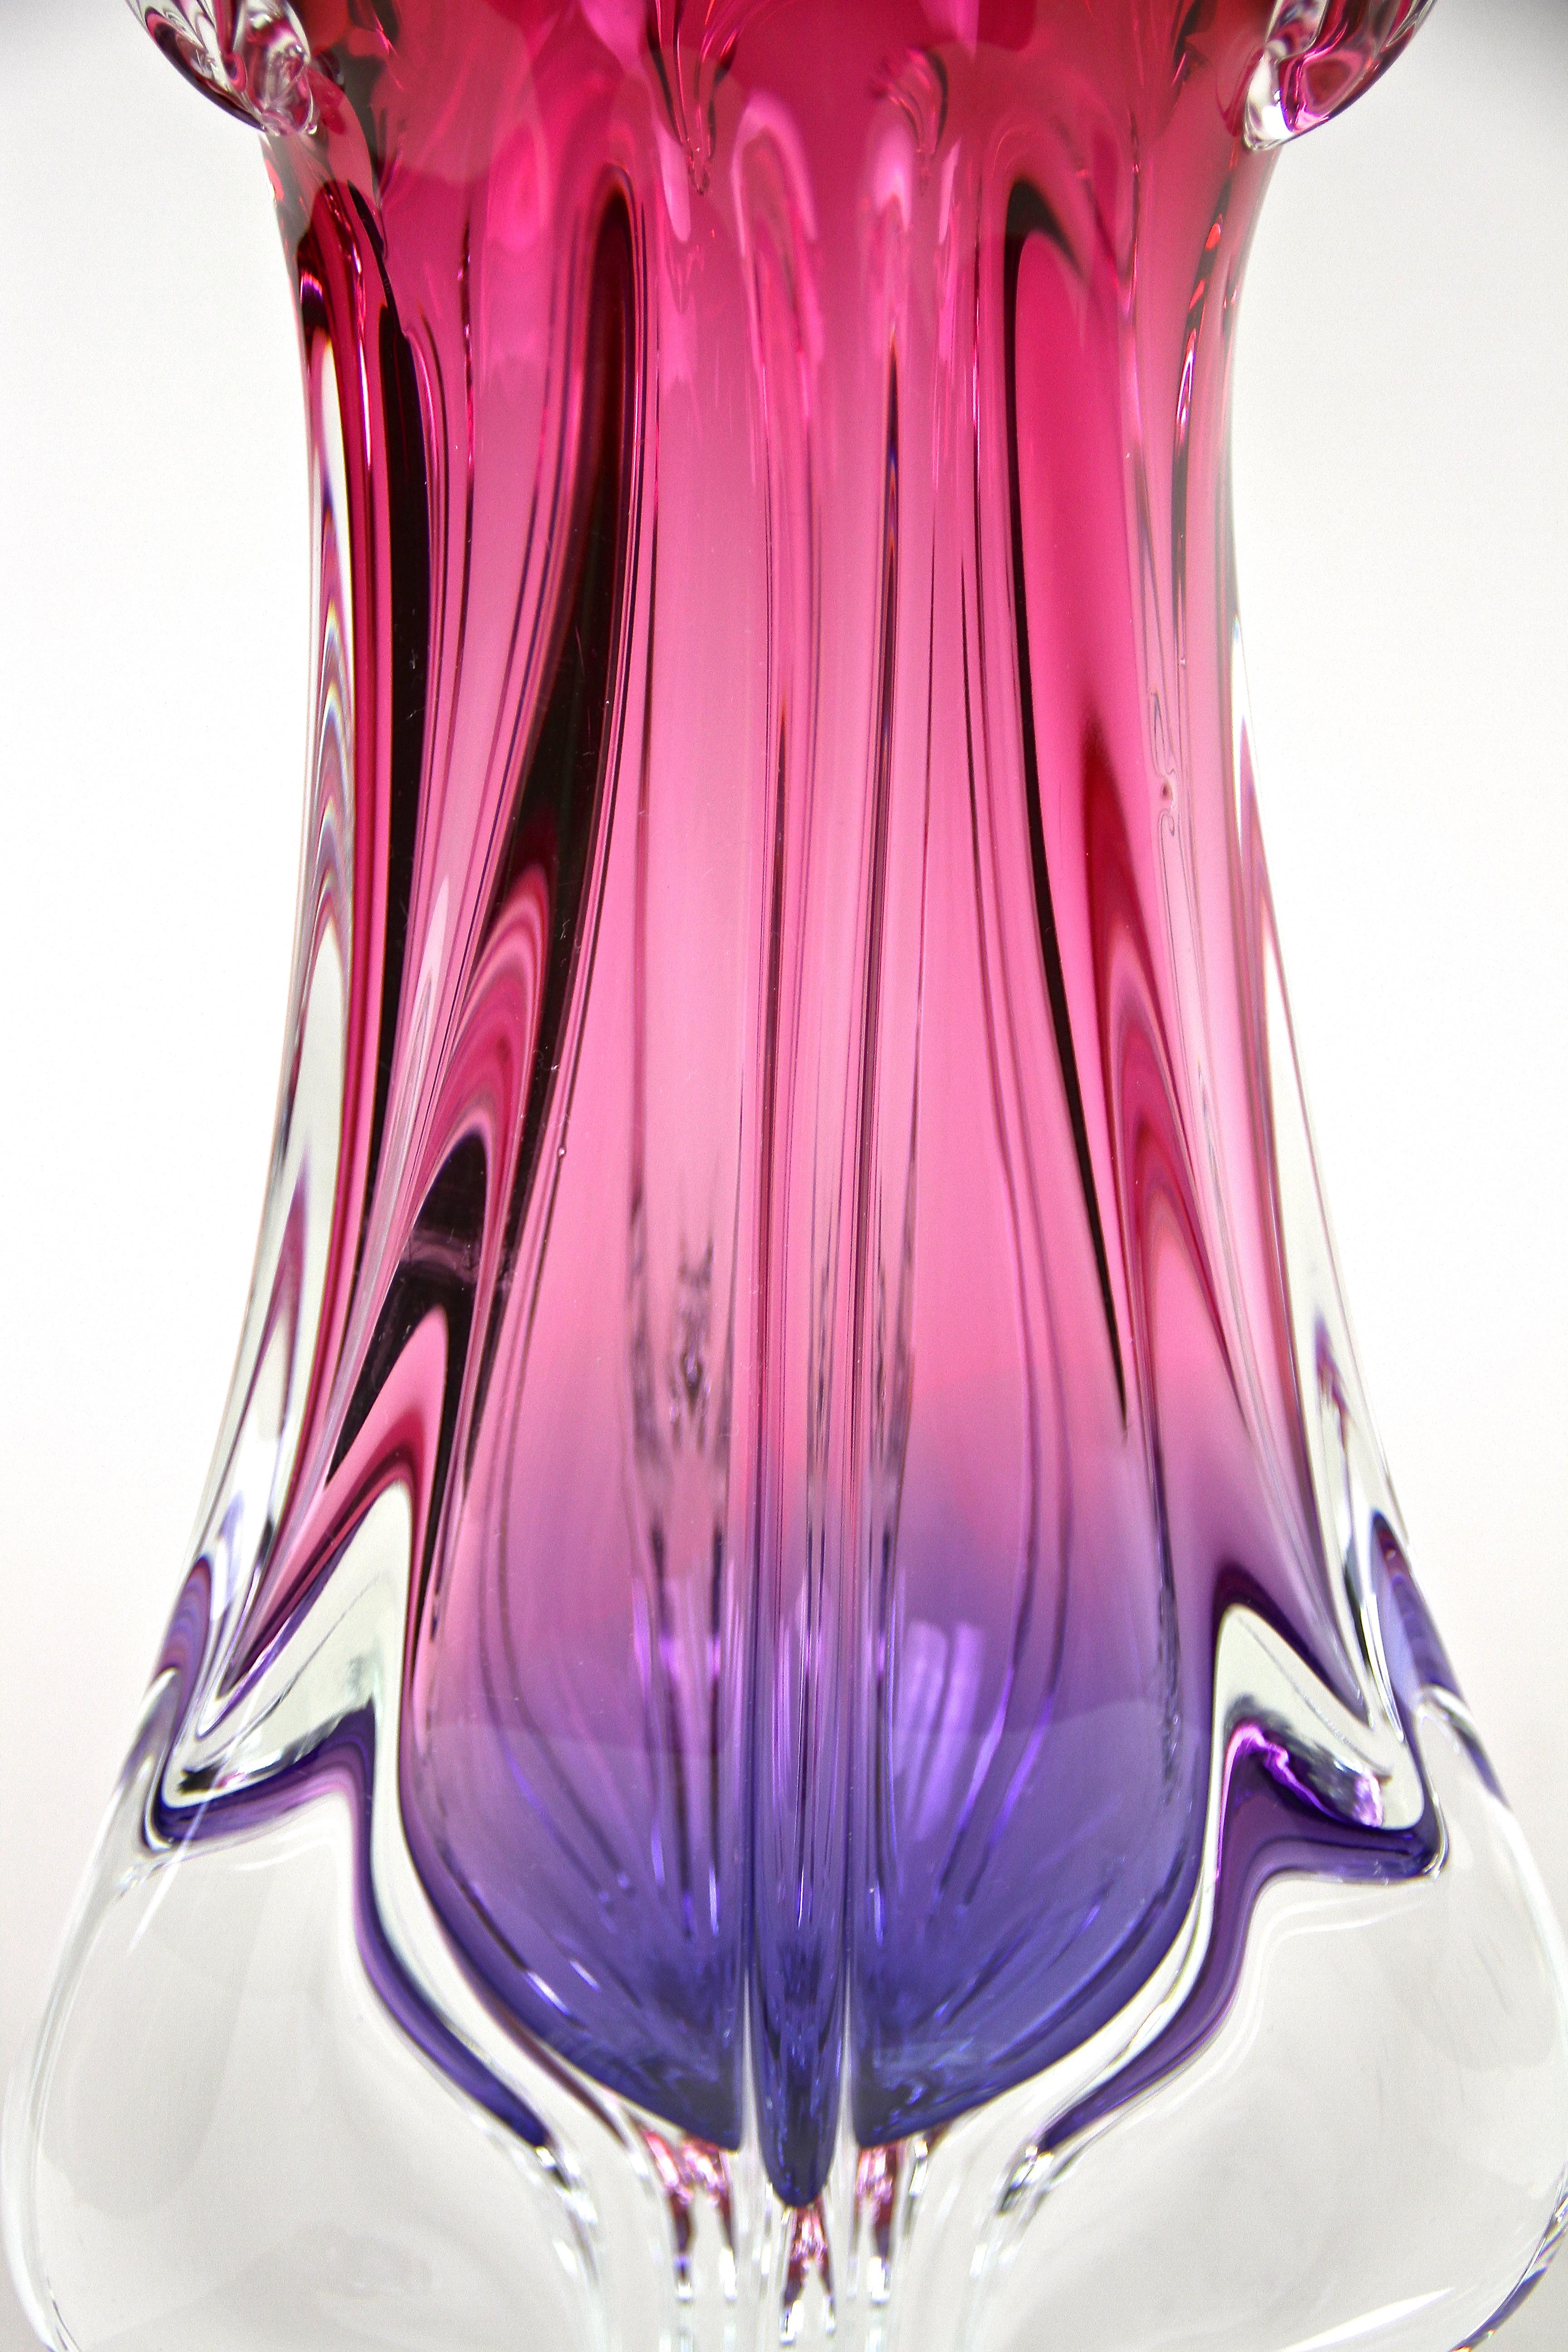 Mid-Century Murano Vase by Sommerso Murano, Italy circa 1960/70 For Sale 2